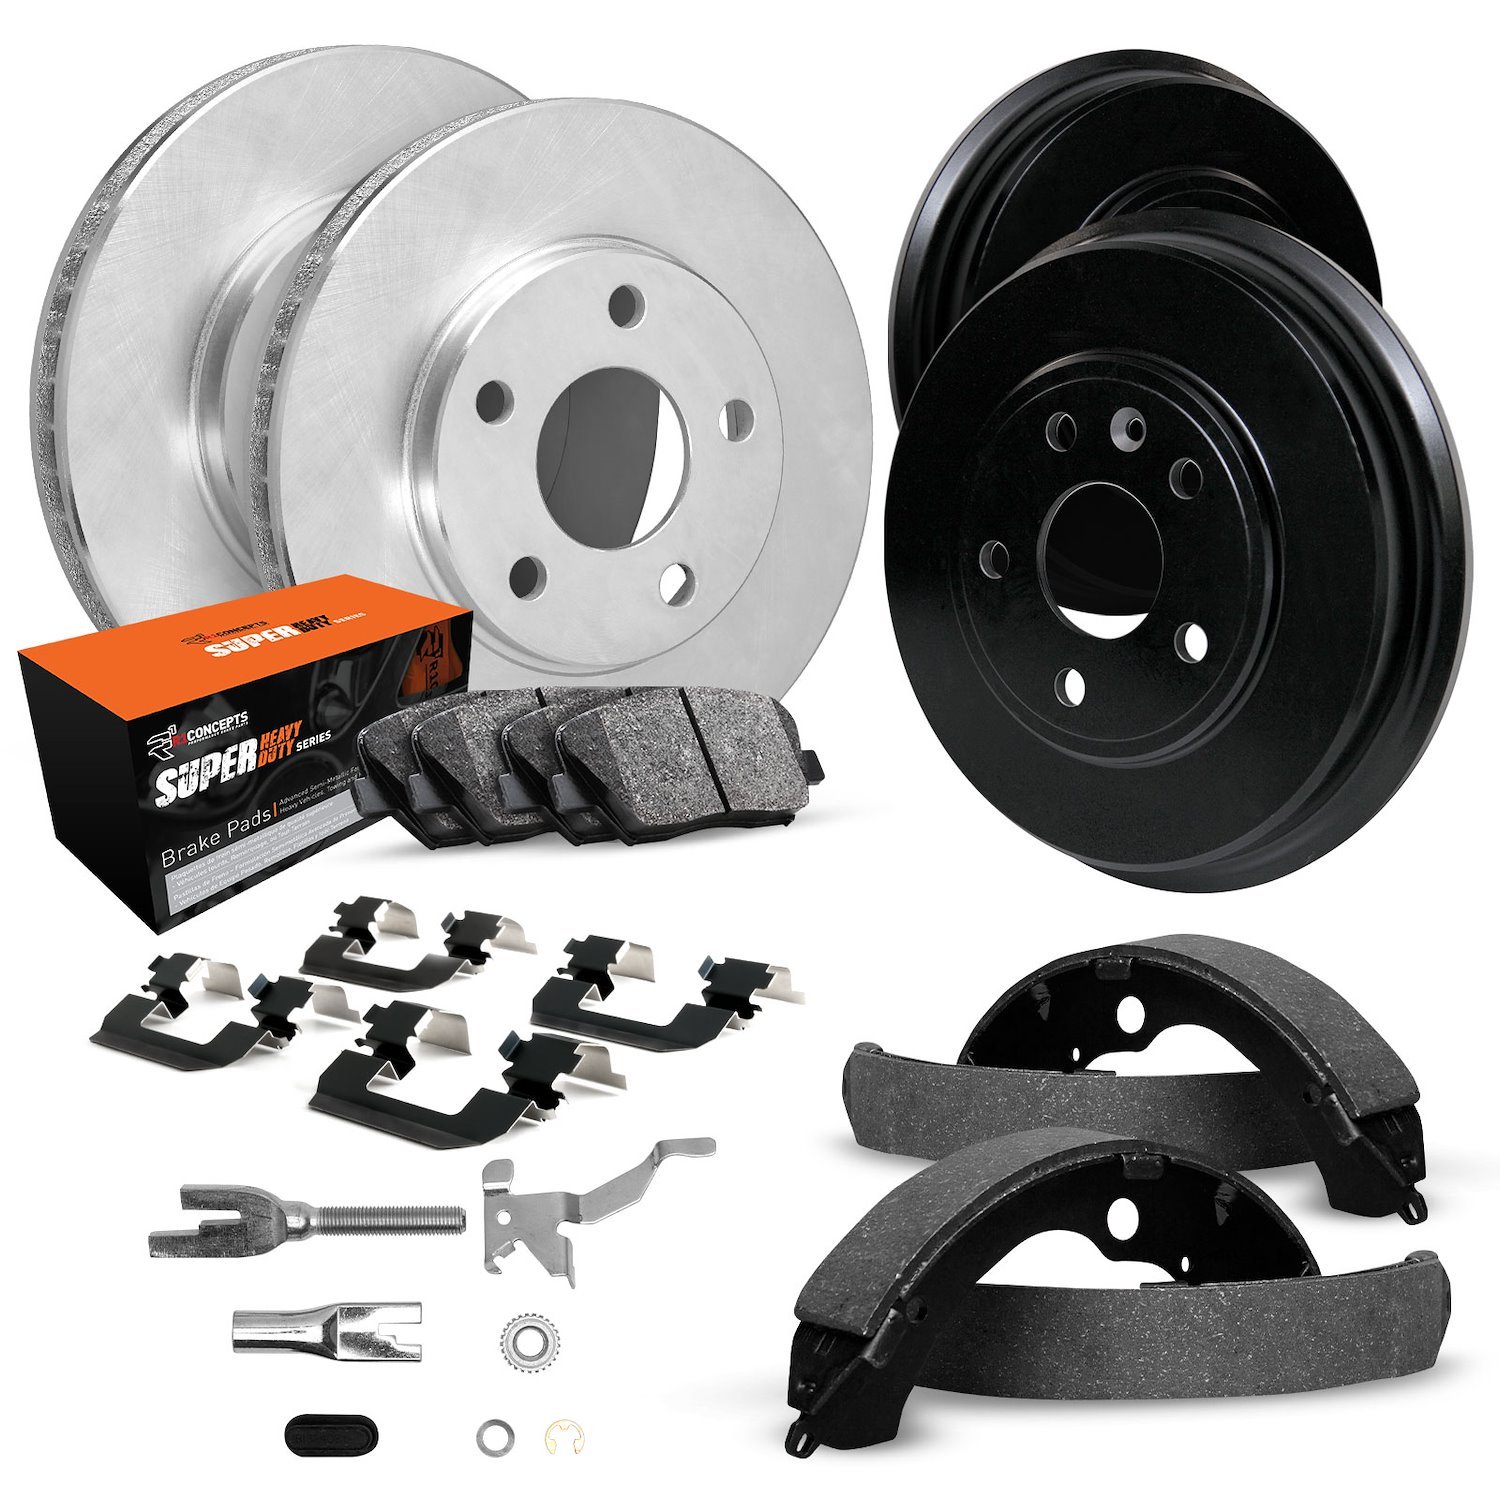 E-Line Blank Brake Rotor & Drum Set w/Super-Duty Pads, Shoes, Hardware, & Adjusters, Fits Select Lexus/Toyota/Scion